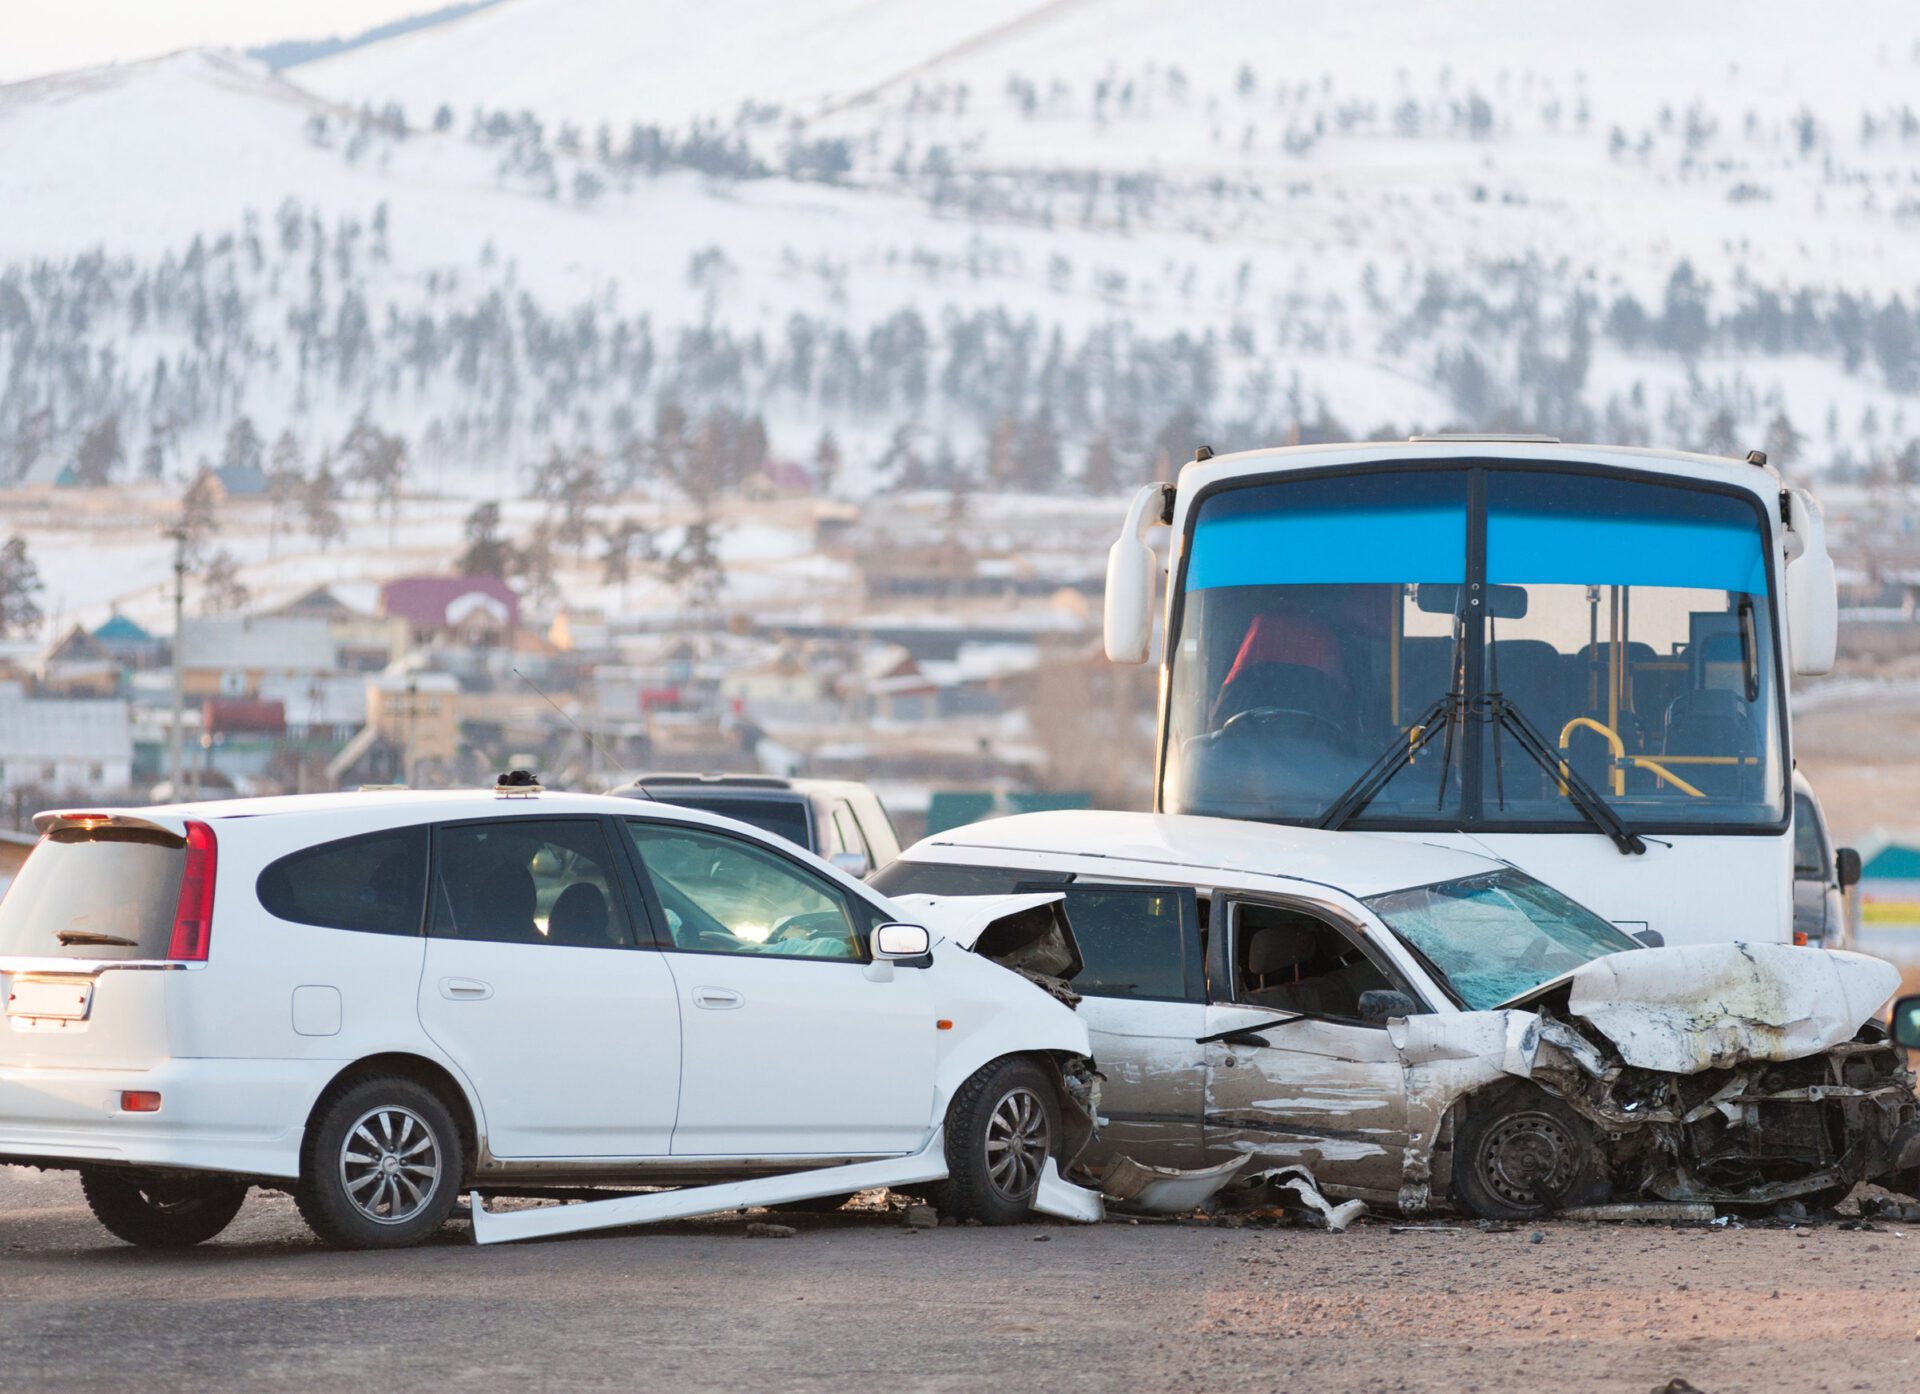 bus and two cars crashed in road accident